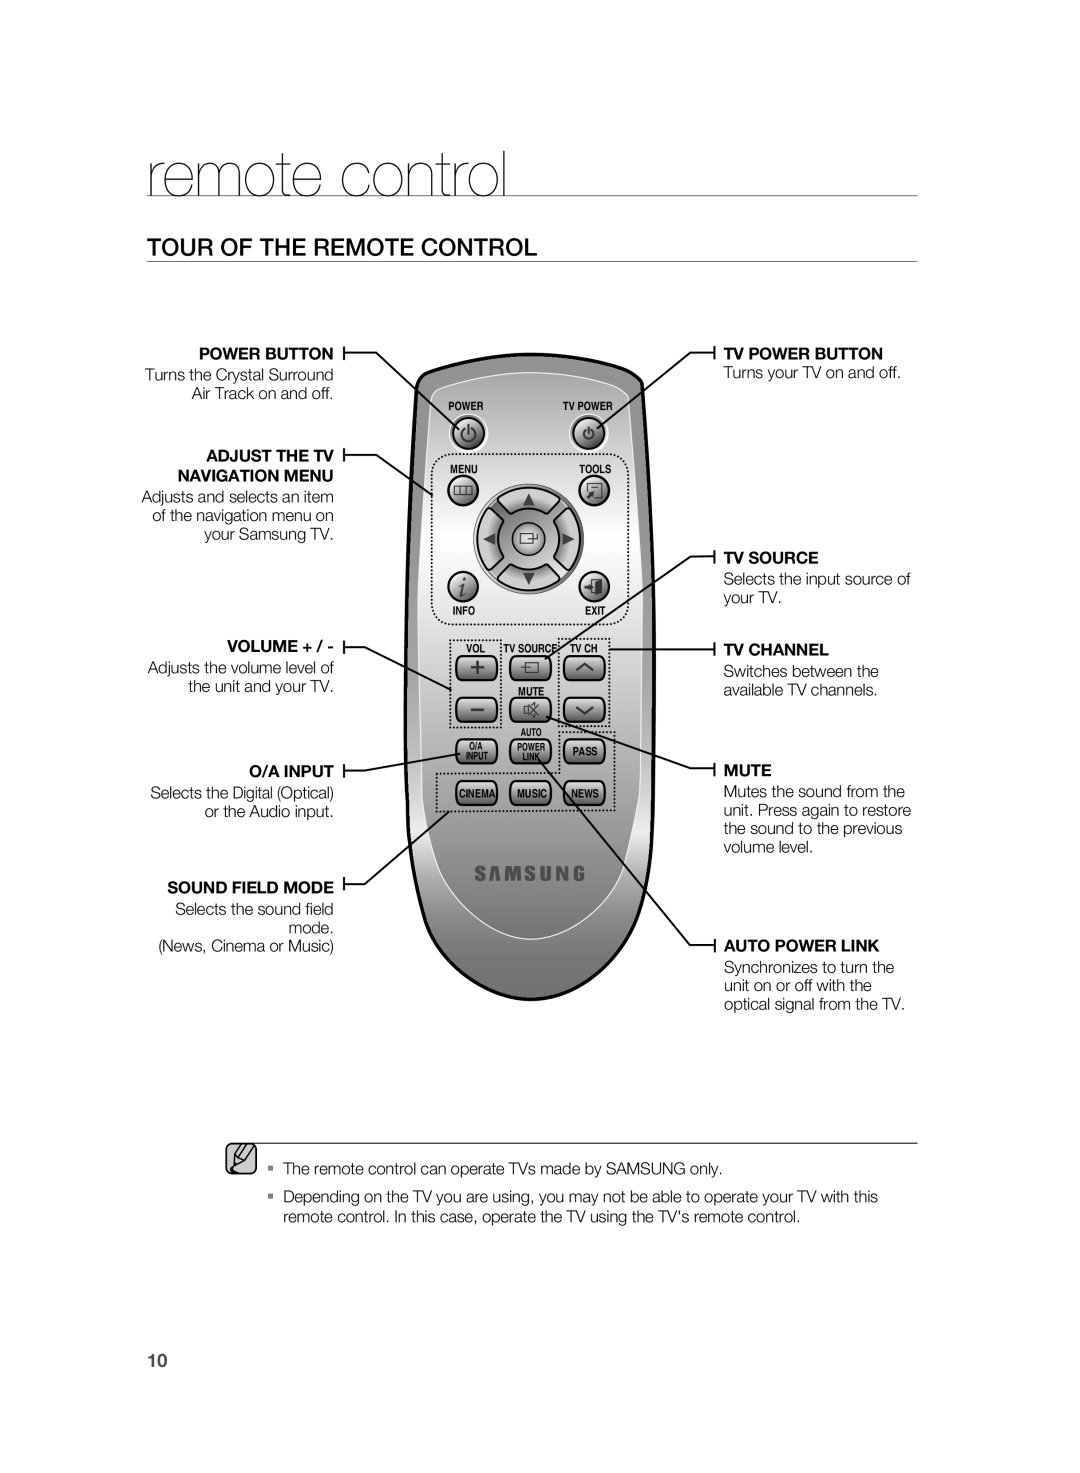 Samsung AH68-02184F user manual remote control, Tour of the Remote Control 